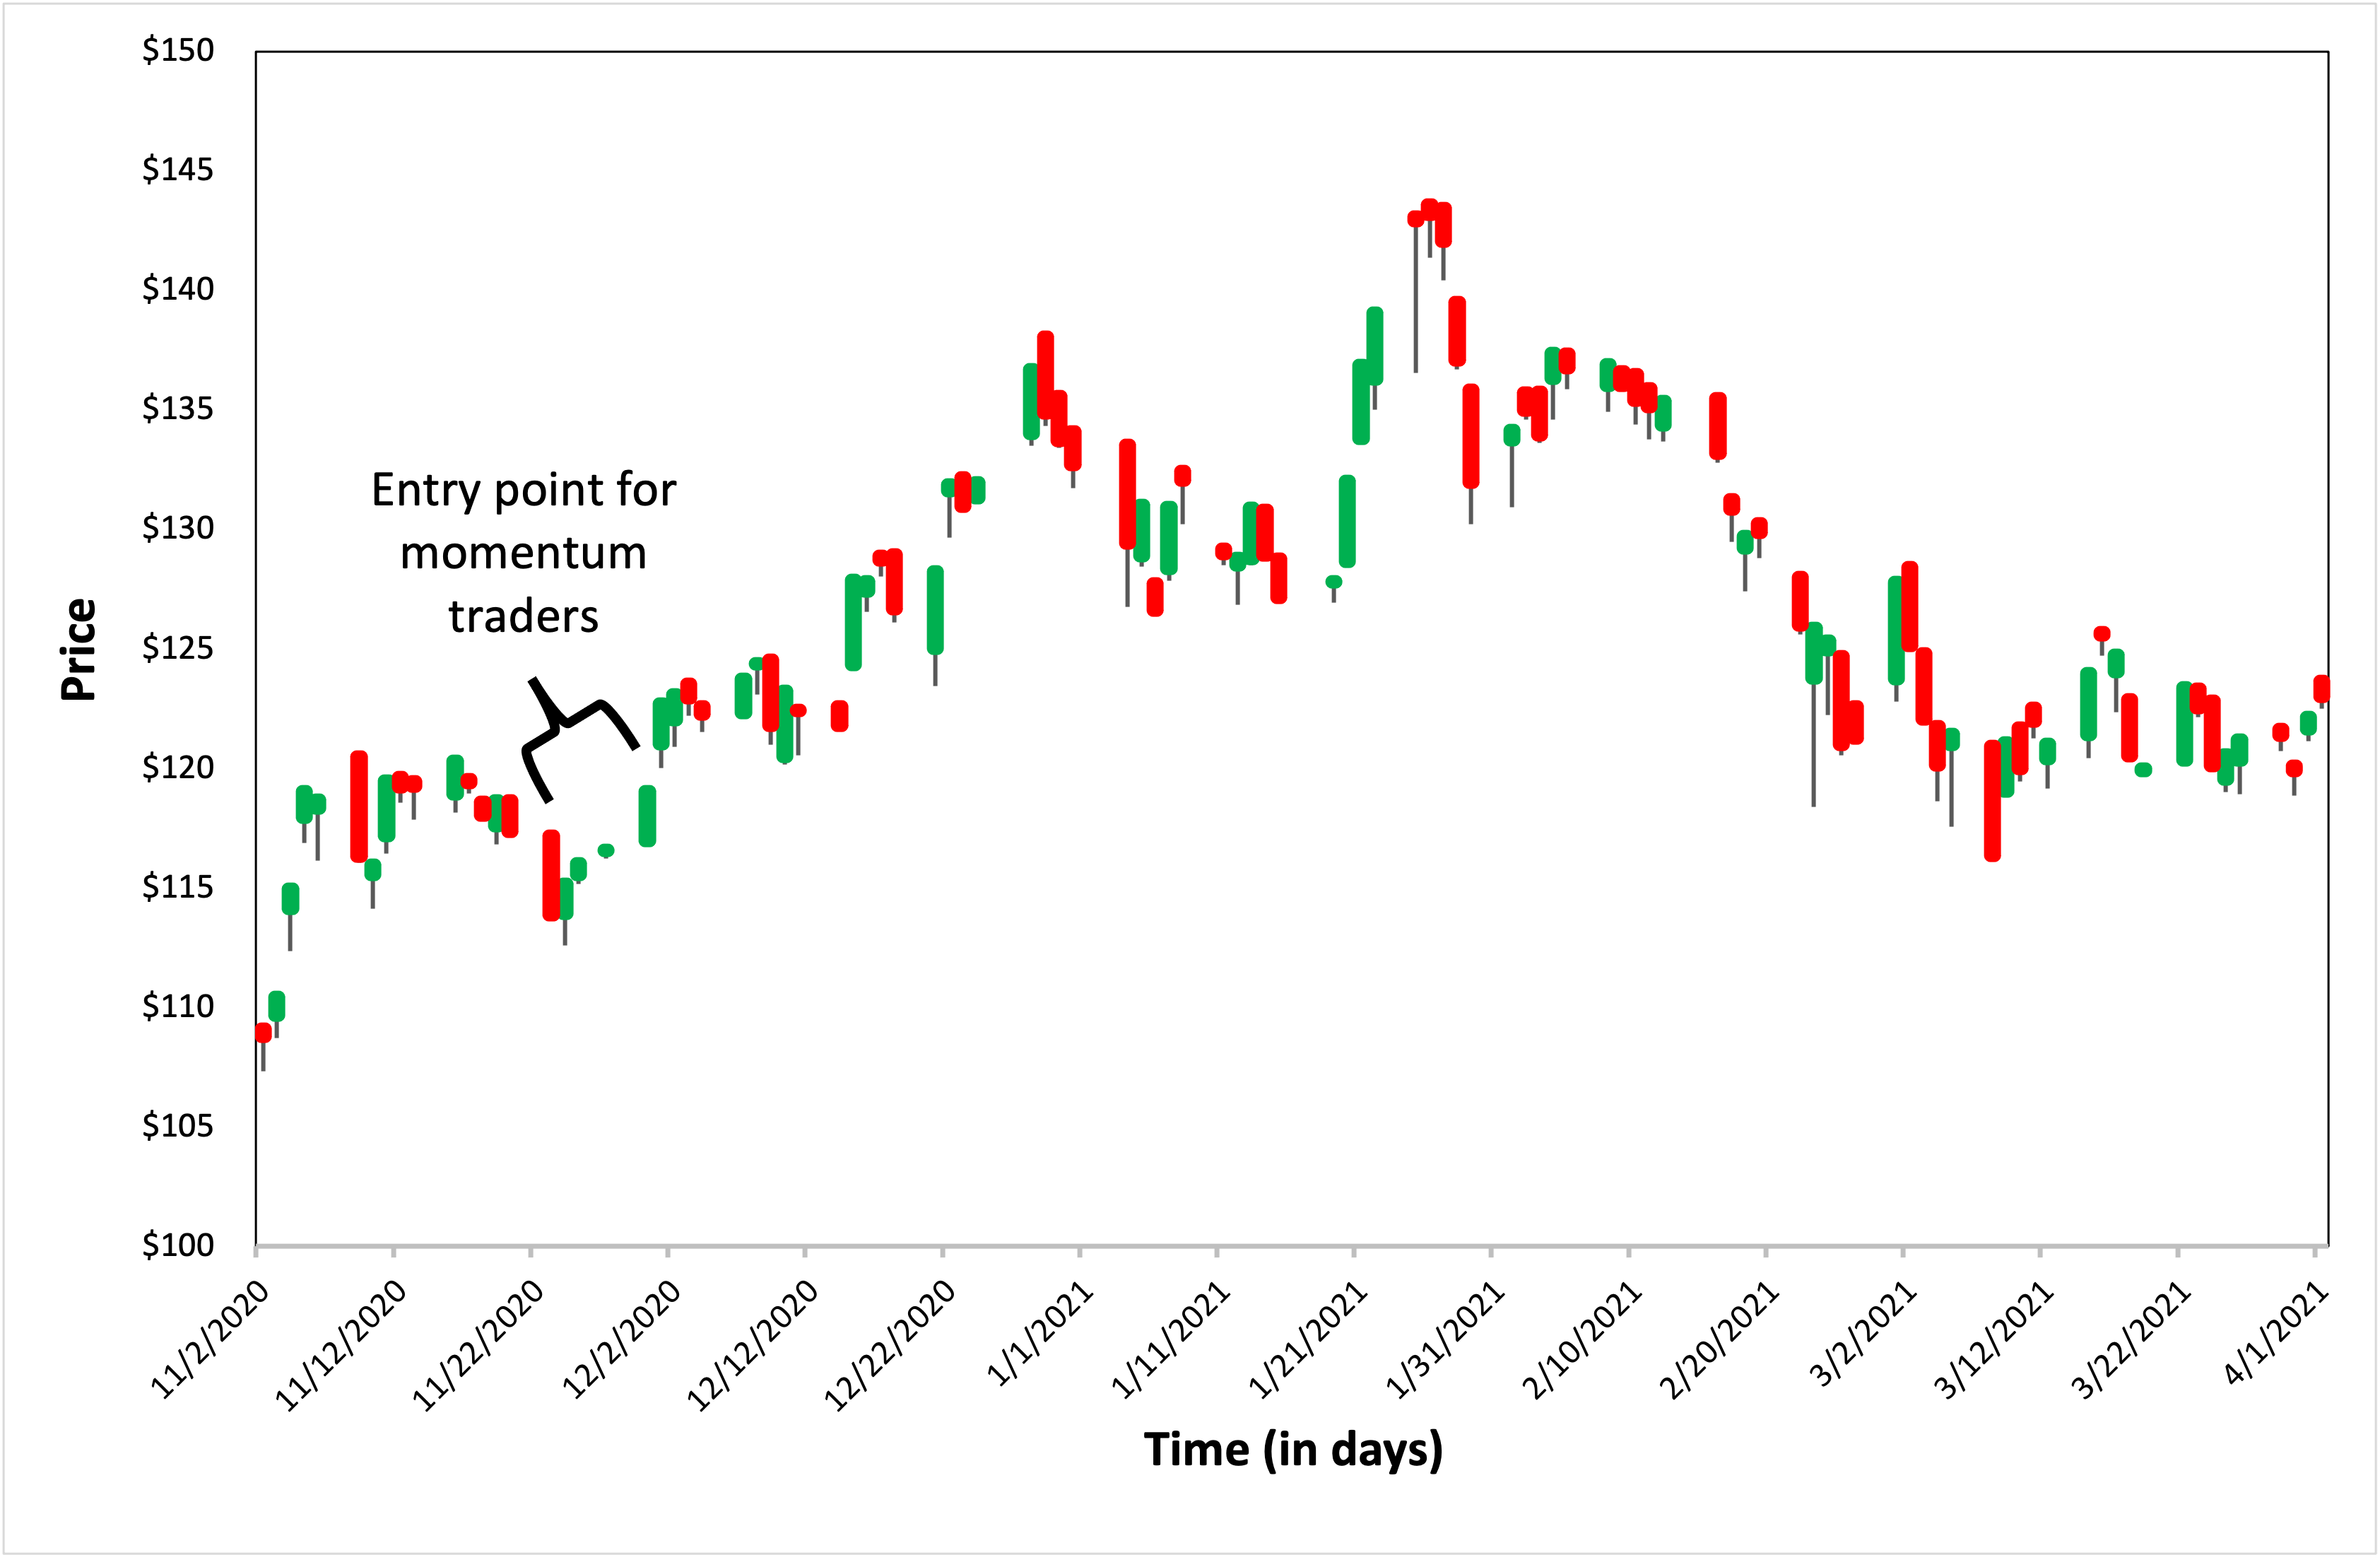 Implementation of the momentum trading strategy for Apple stock 